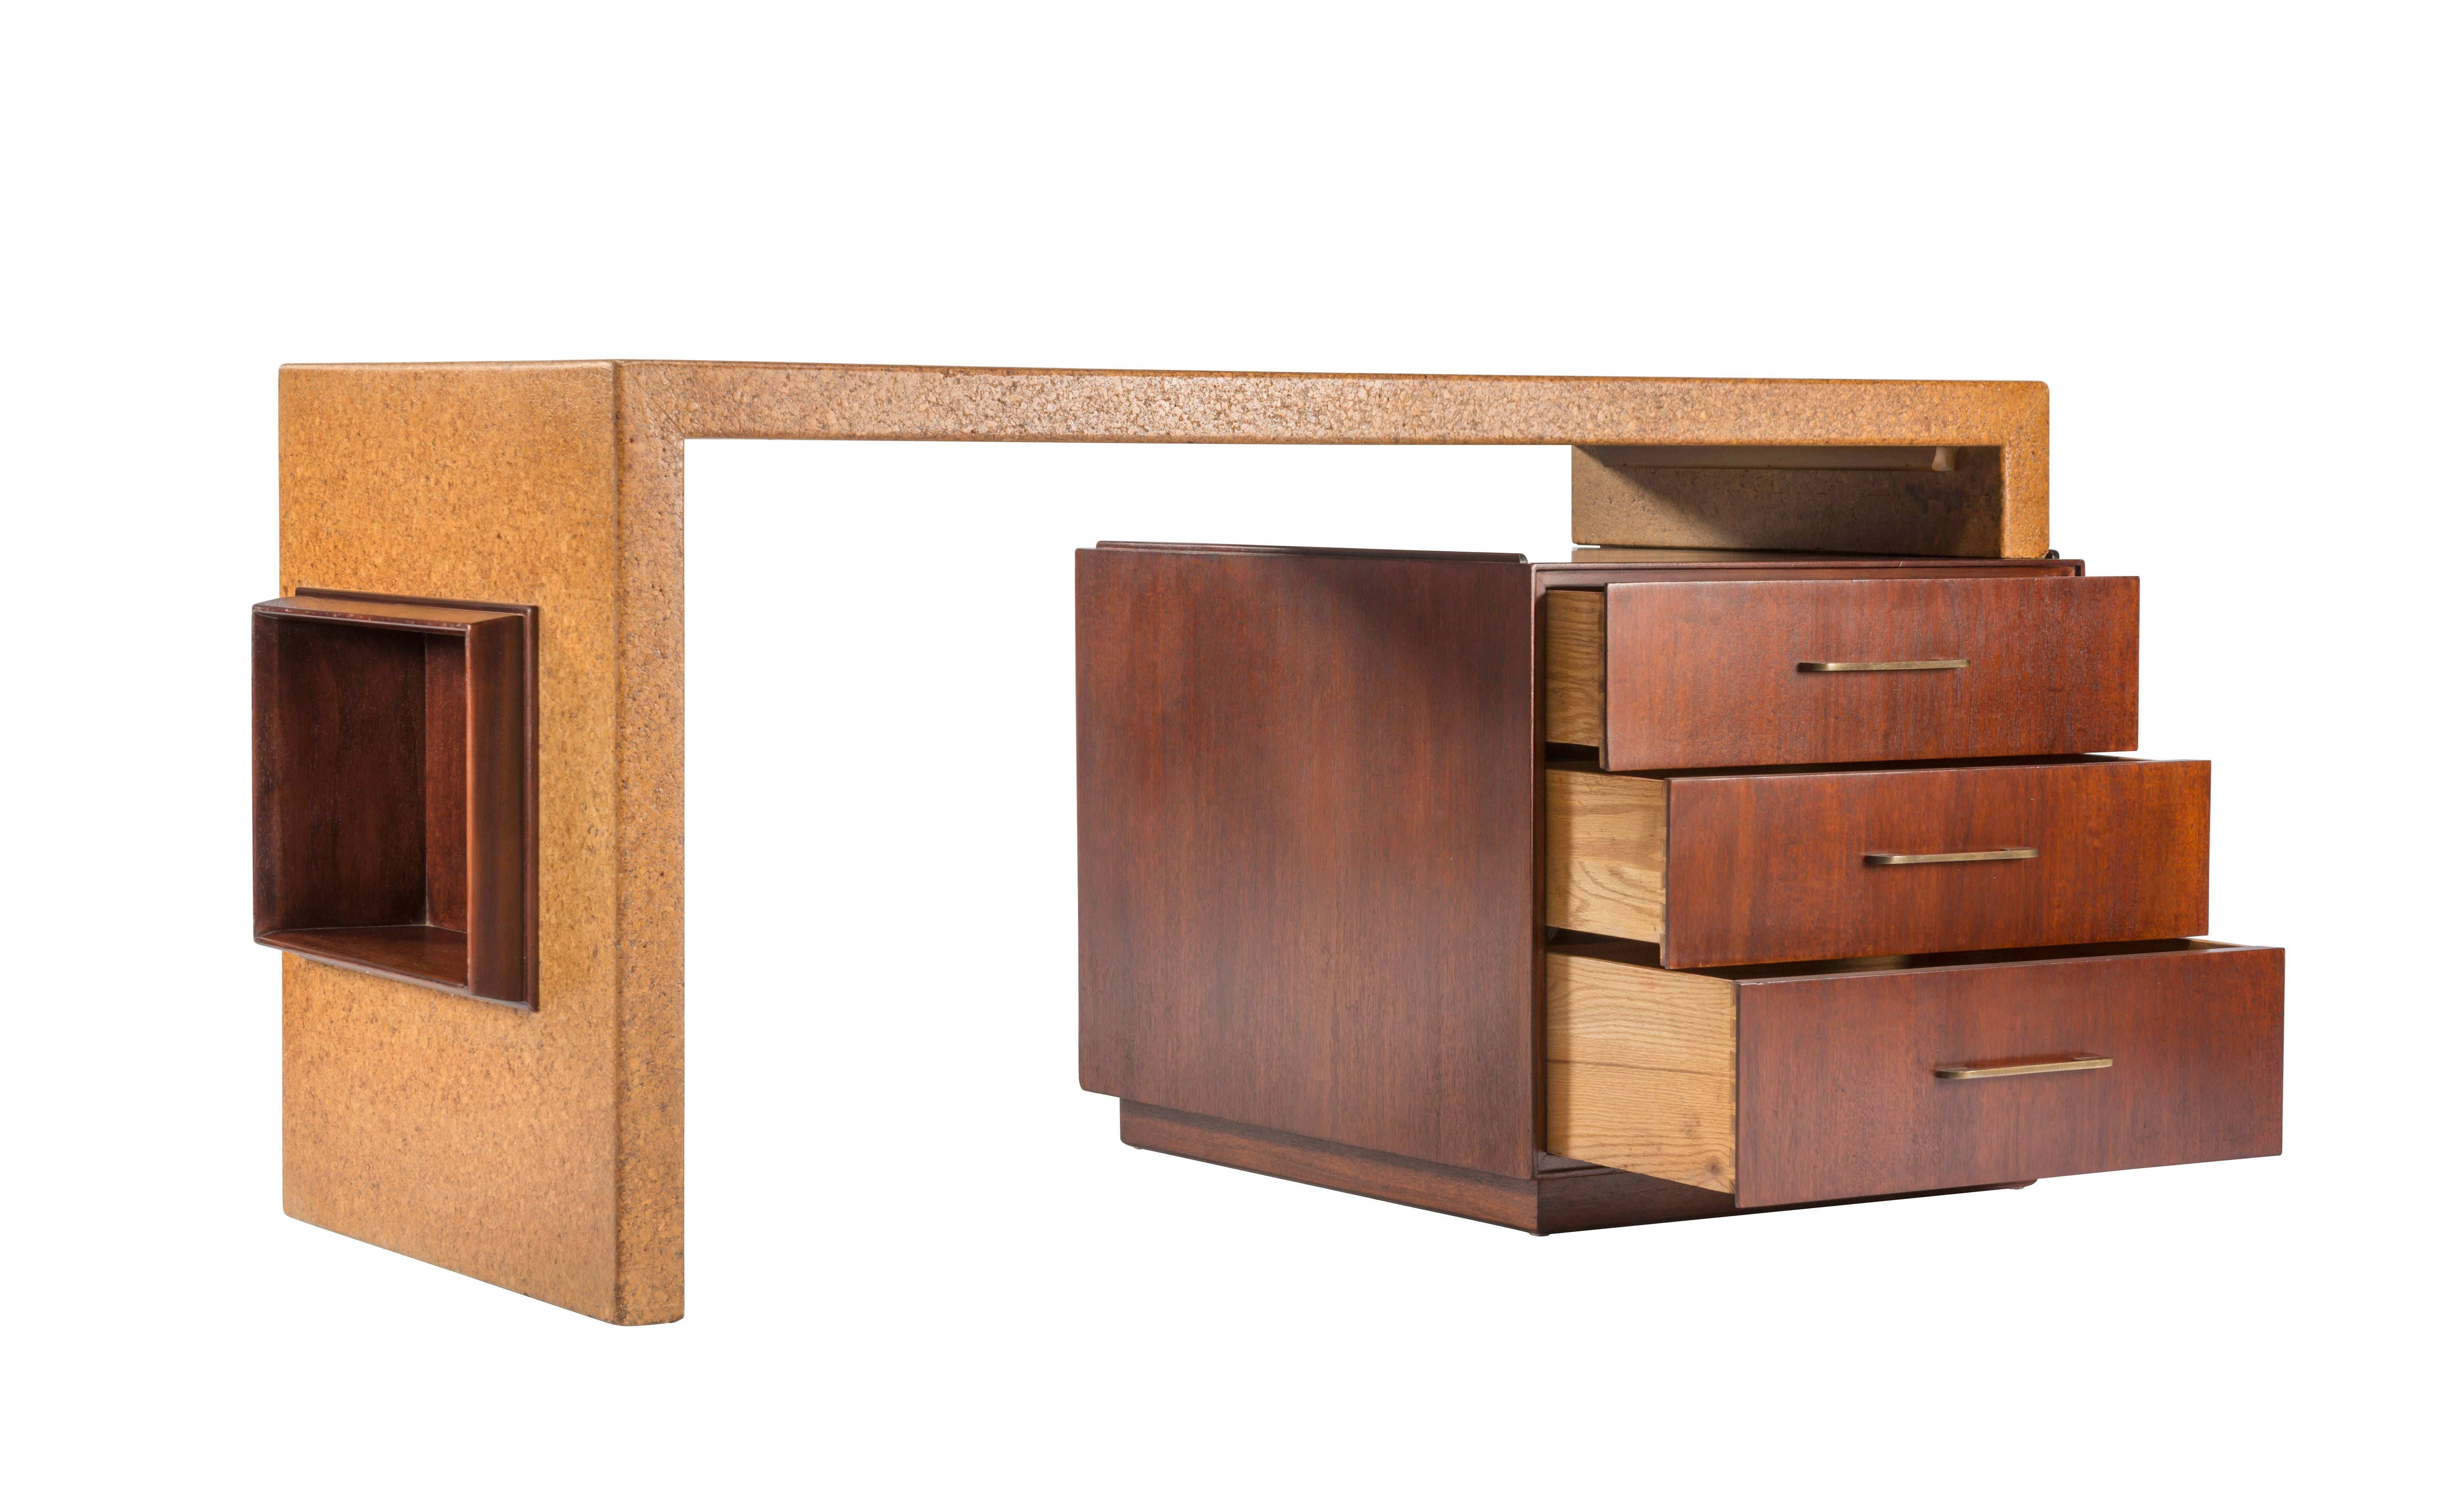 American Rare Cork and Mahogany Desk by Paul Frankl